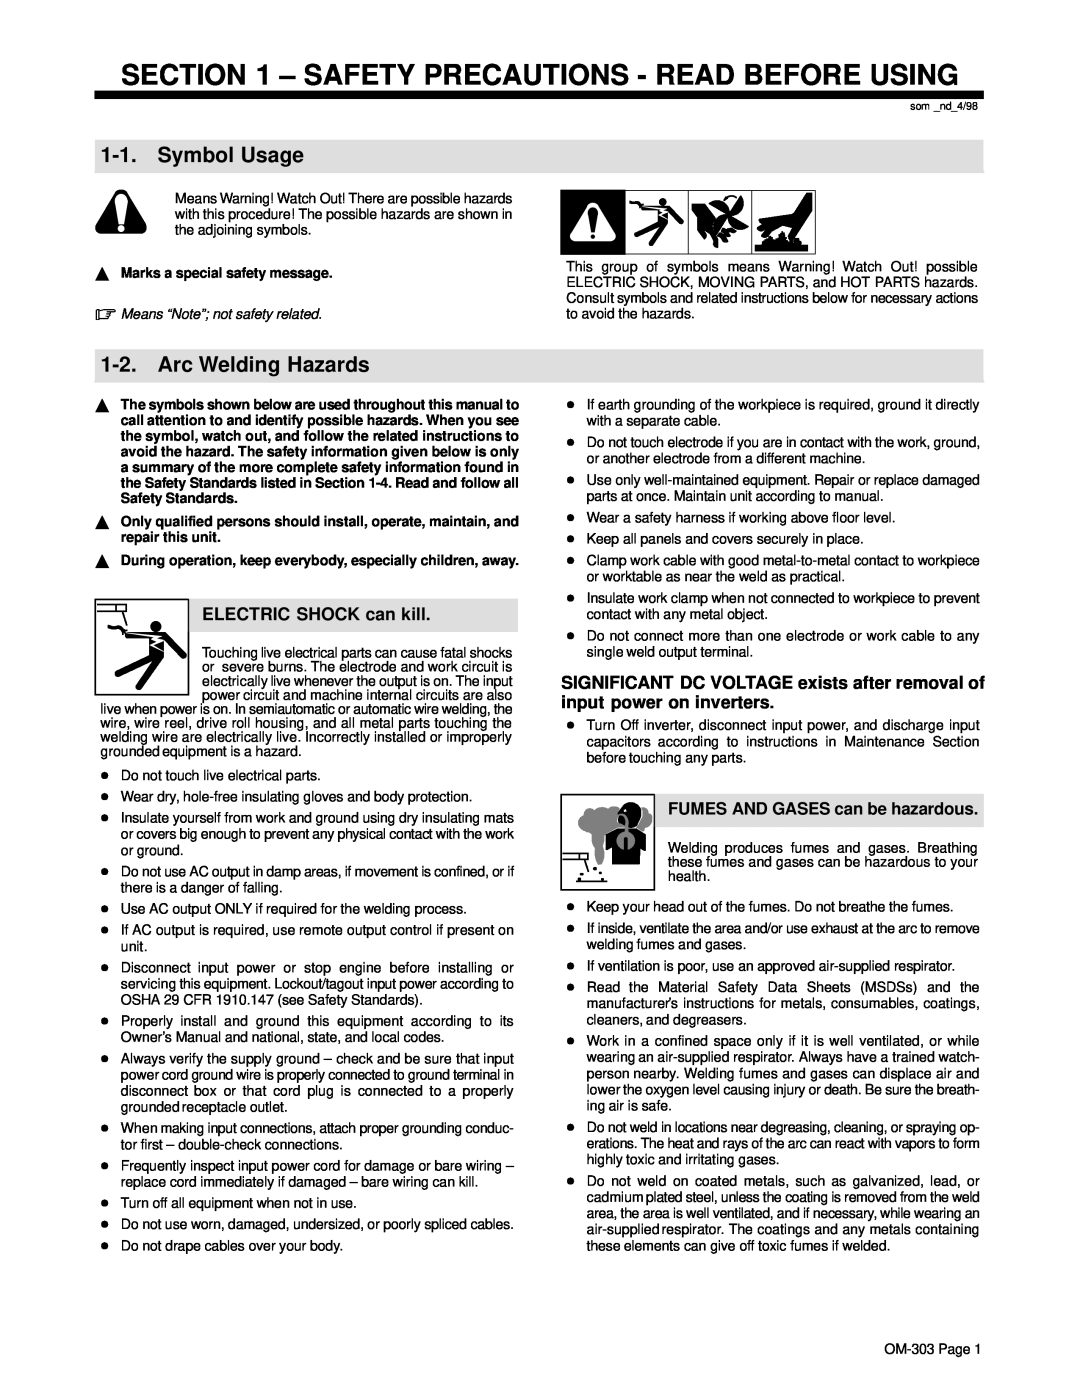 Hobart OM-303 manual Symbol Usage, Arc Welding Hazards, Safety Precautions - Read Before Using, ELECTRIC SHOCK can kill 